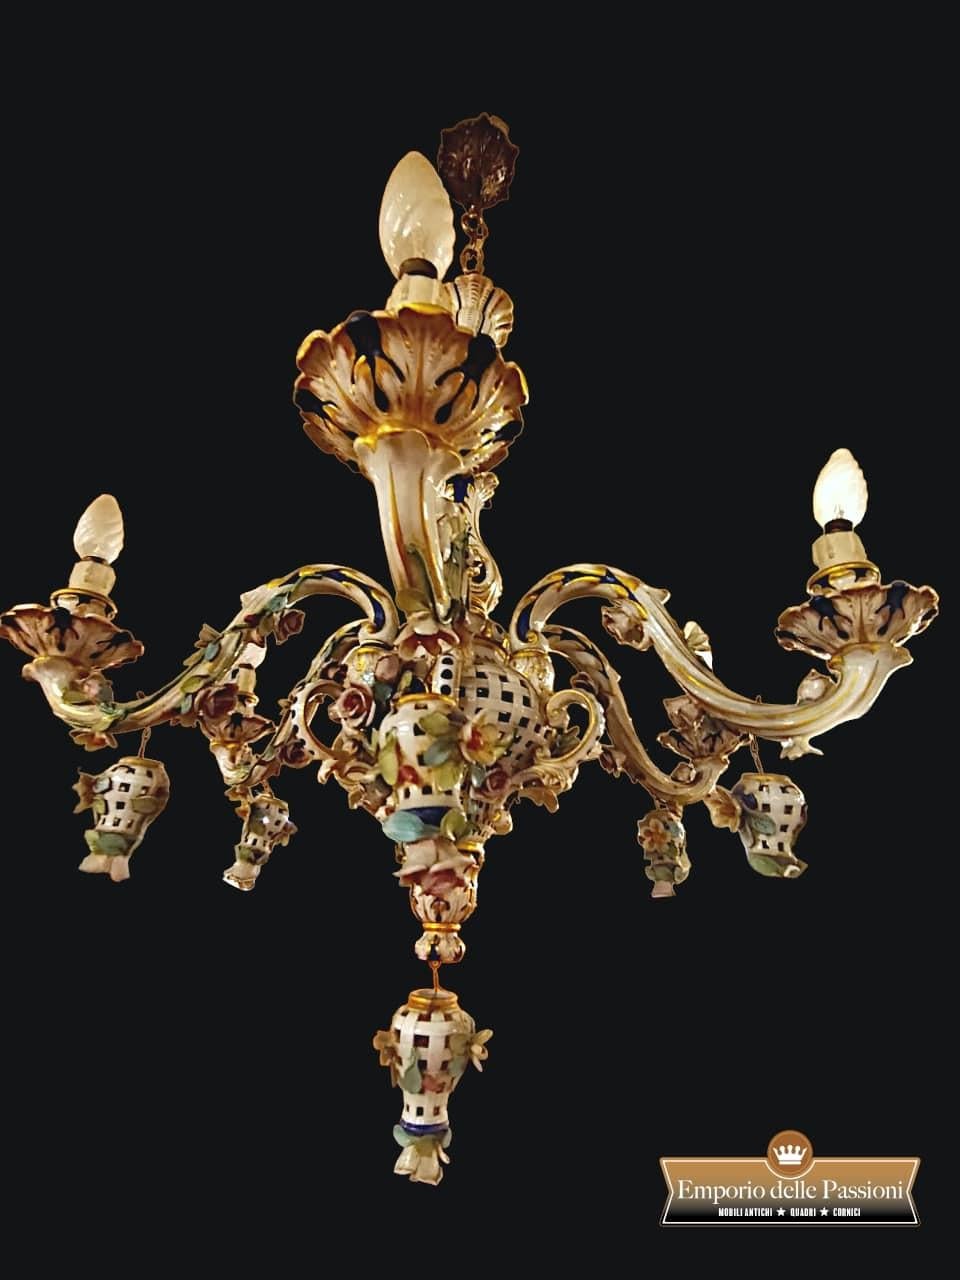 Capodimonte Porcelain Chandelier

Polychrome Capodimonte Porcelain Chandelier, from the 1950s.

Ceramic body decorated with colorful floral motifs and pendants in colored and gilded ceramic under the lights.

Large 6-arm chandelier, wonderfully